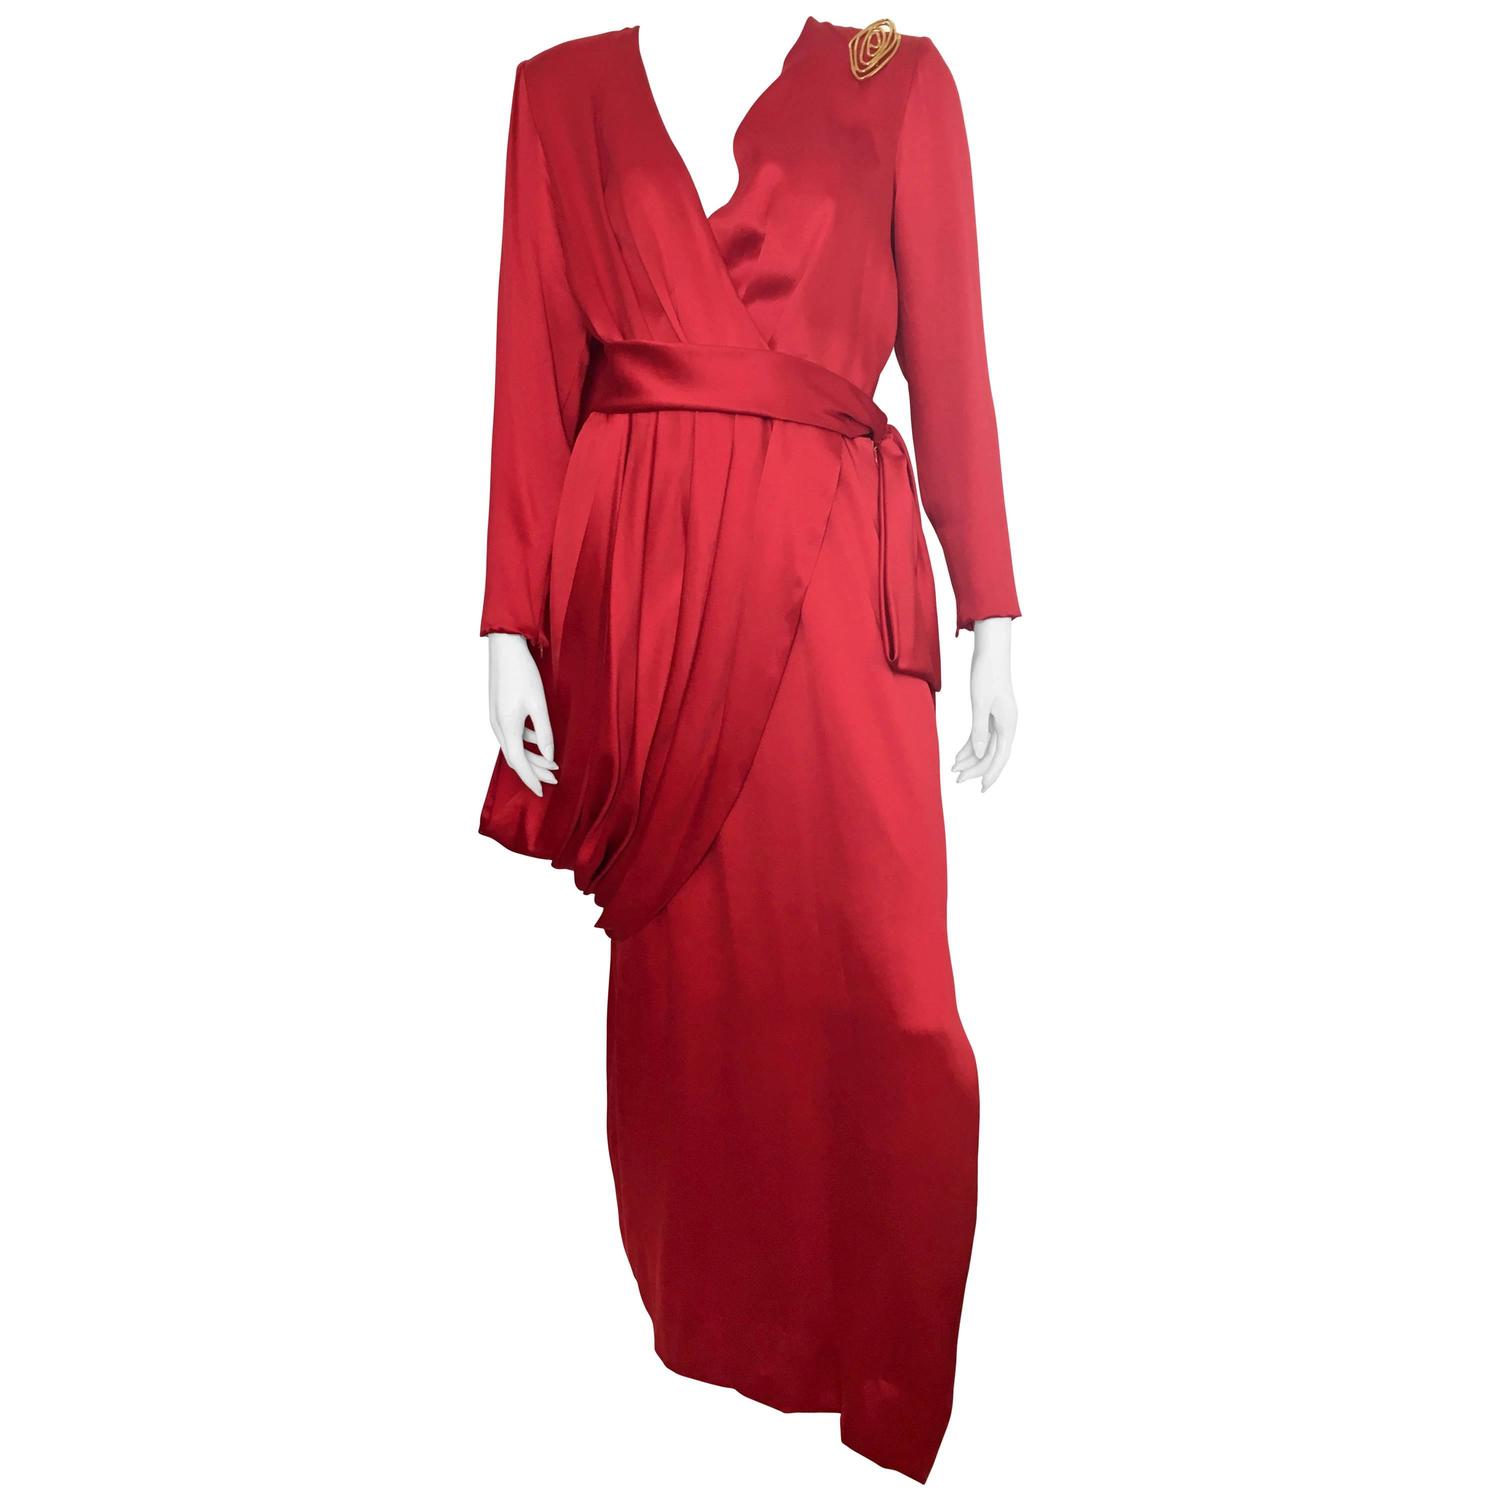 Givenchy Couture 1996 Red Silk Gown Size 10 / 42. For Sale at 1stdibs